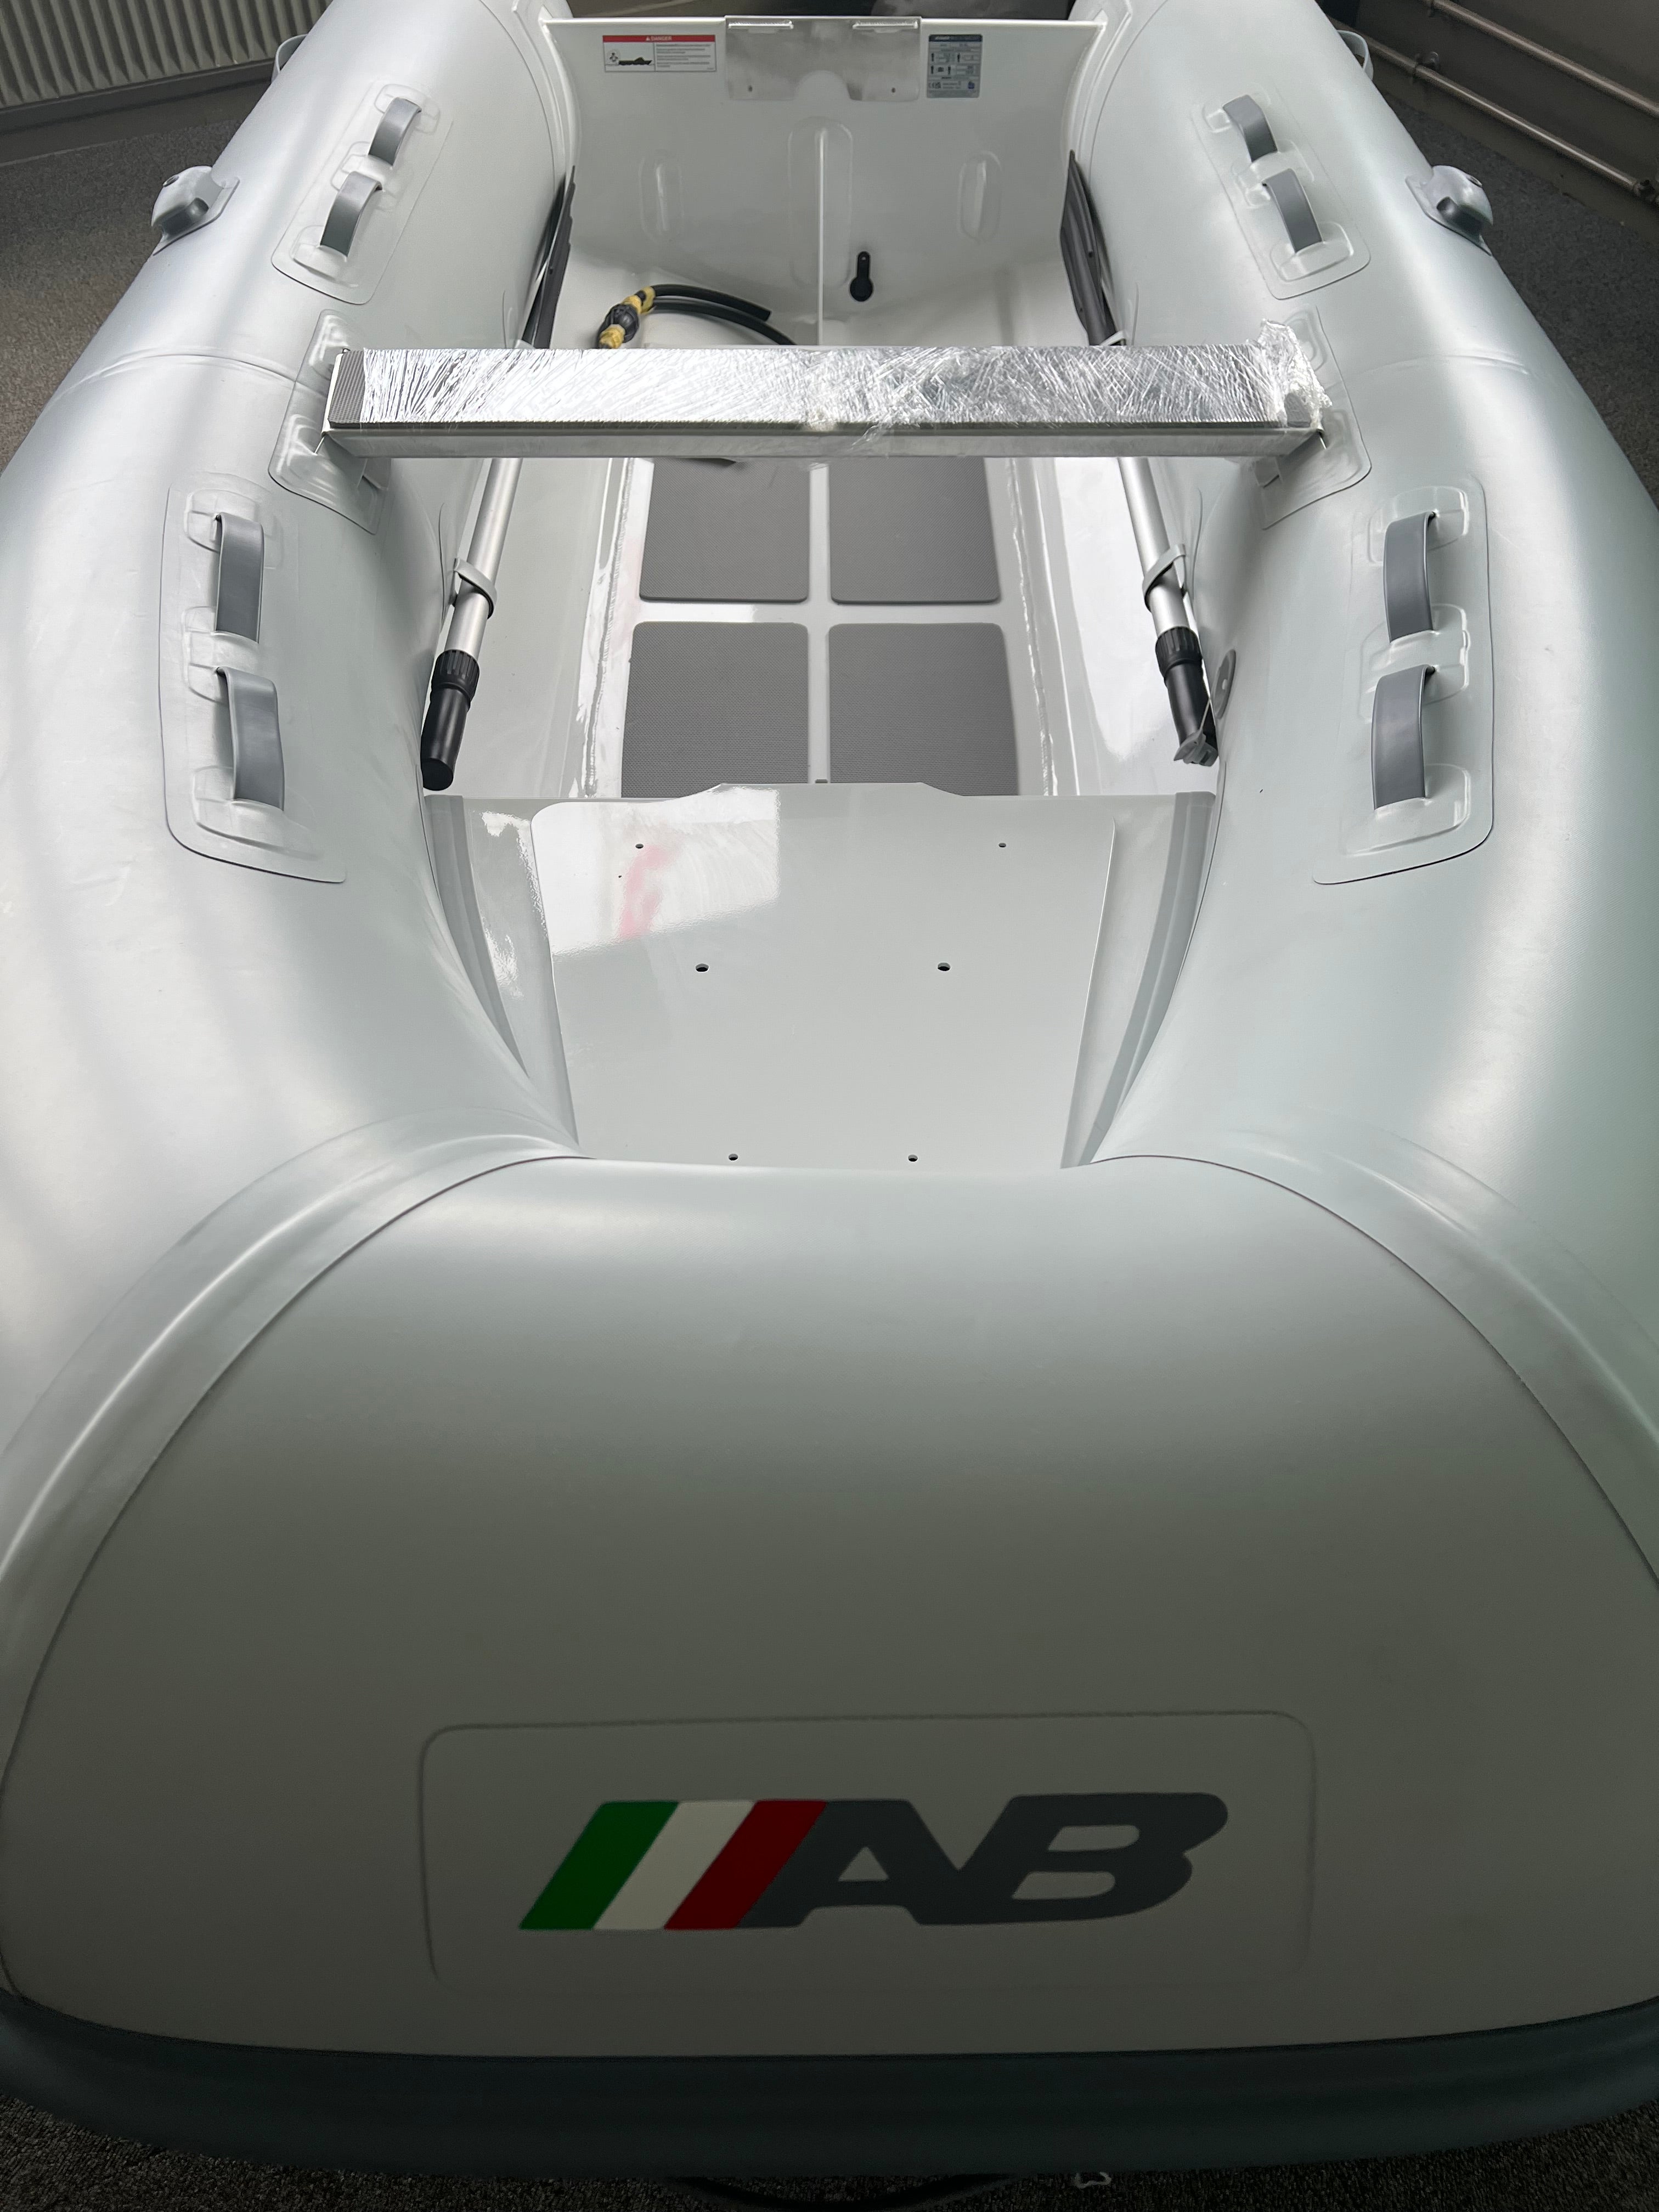 AB 10AL LIGHT GREY WITH PORTABLE FUEL TANK INSTALLED